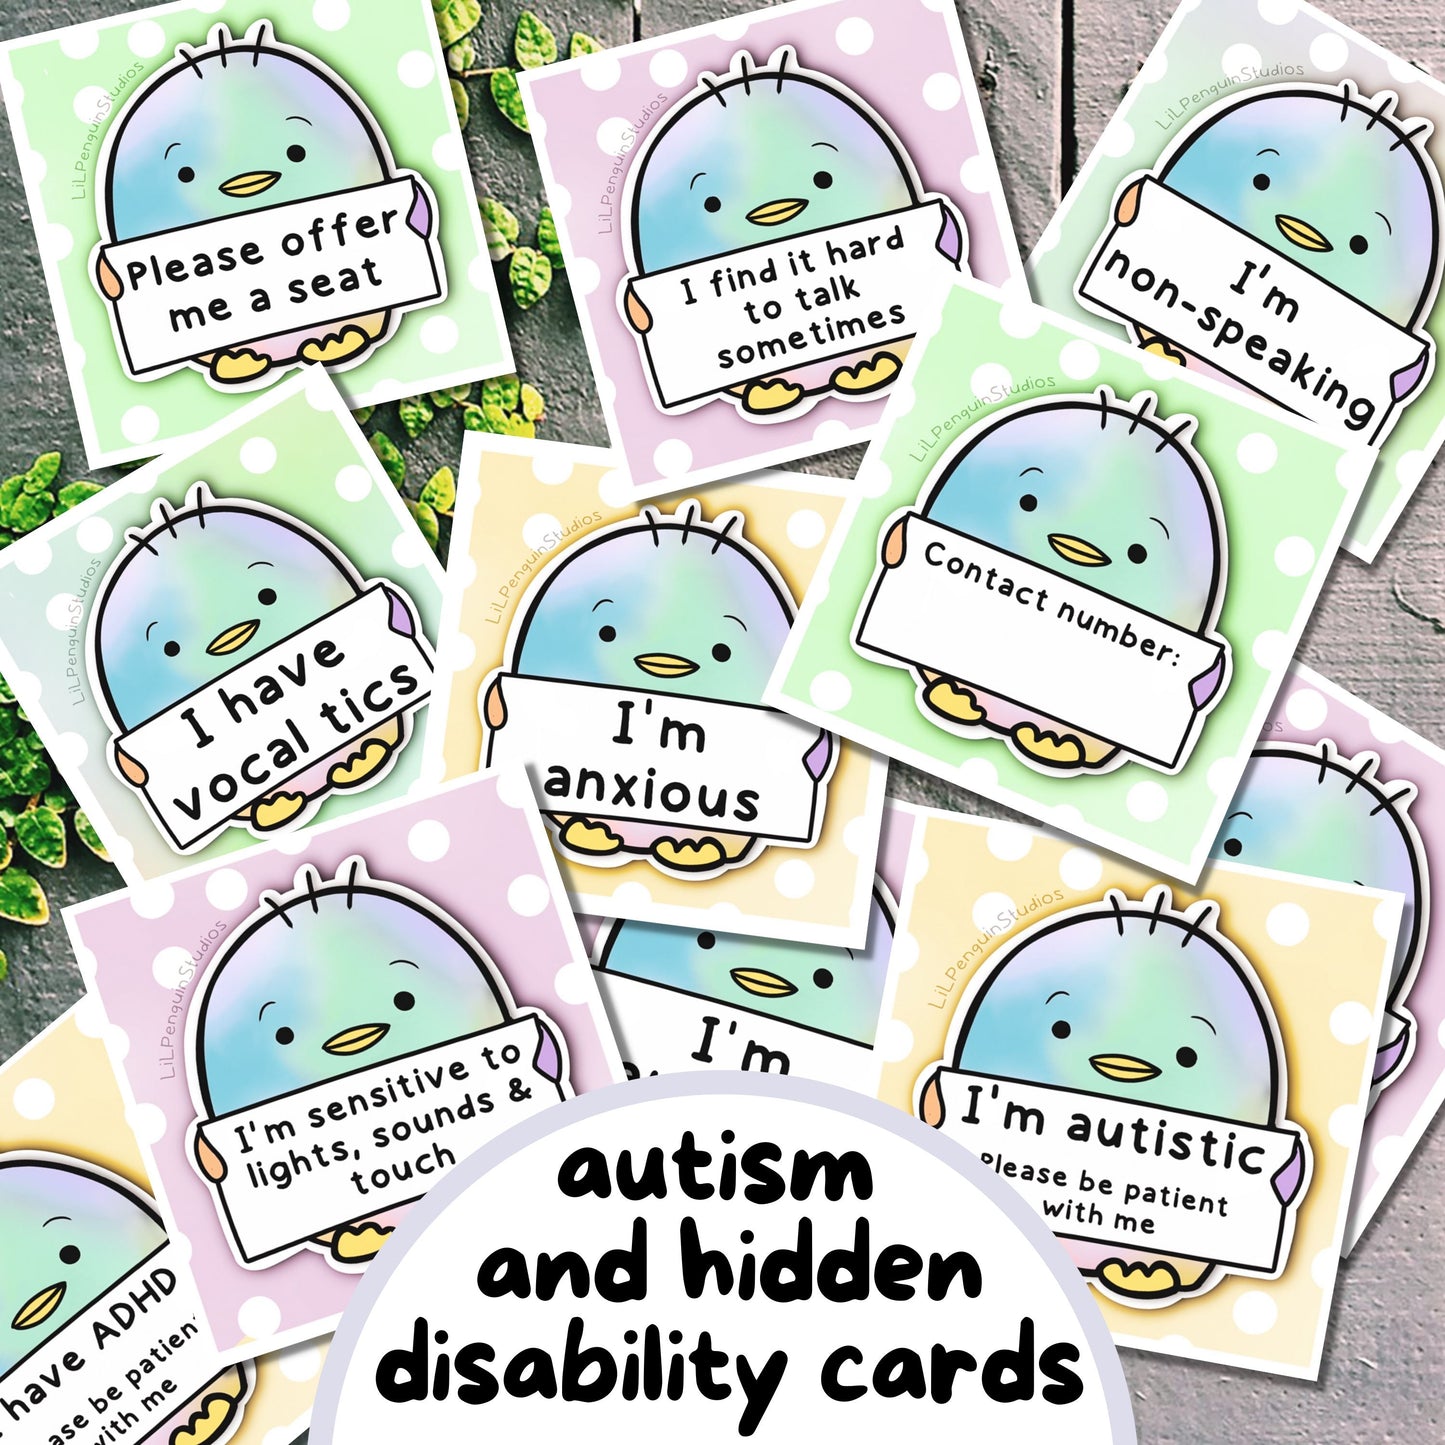 Autism and Hiddend Disability Cards Bundle Written and hand-drawn by an autistic artist (LiL Penguin Studios (autism_happy_plance on Instagram)